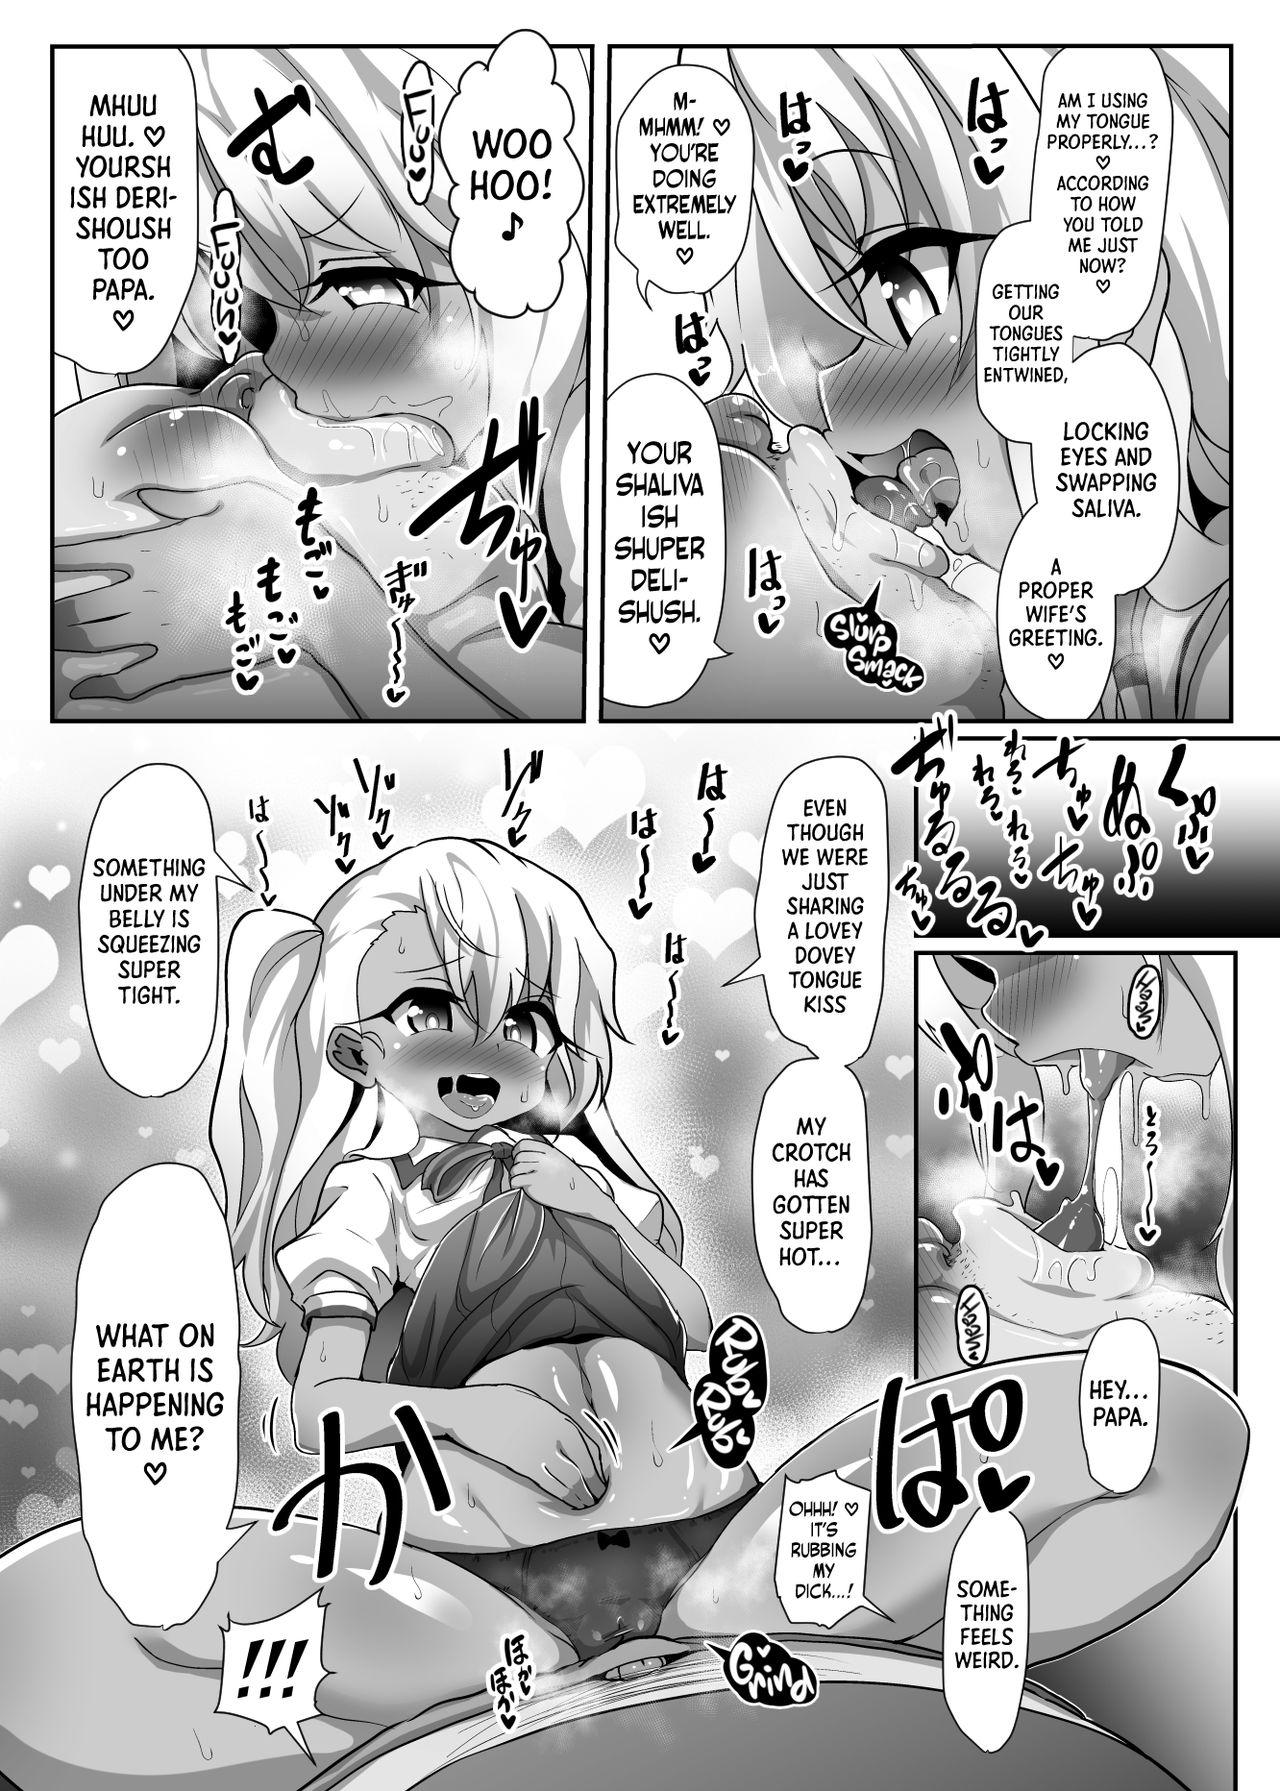 [Kotee] A book where Chloe-chan pretends to be hypnotized and relentlessly gives birth over and over to a disgusting old micro-dicked virgin’s babies. (Fate/kaleid liner Prisma Illya) [English] [Secluded] [Digital] 7